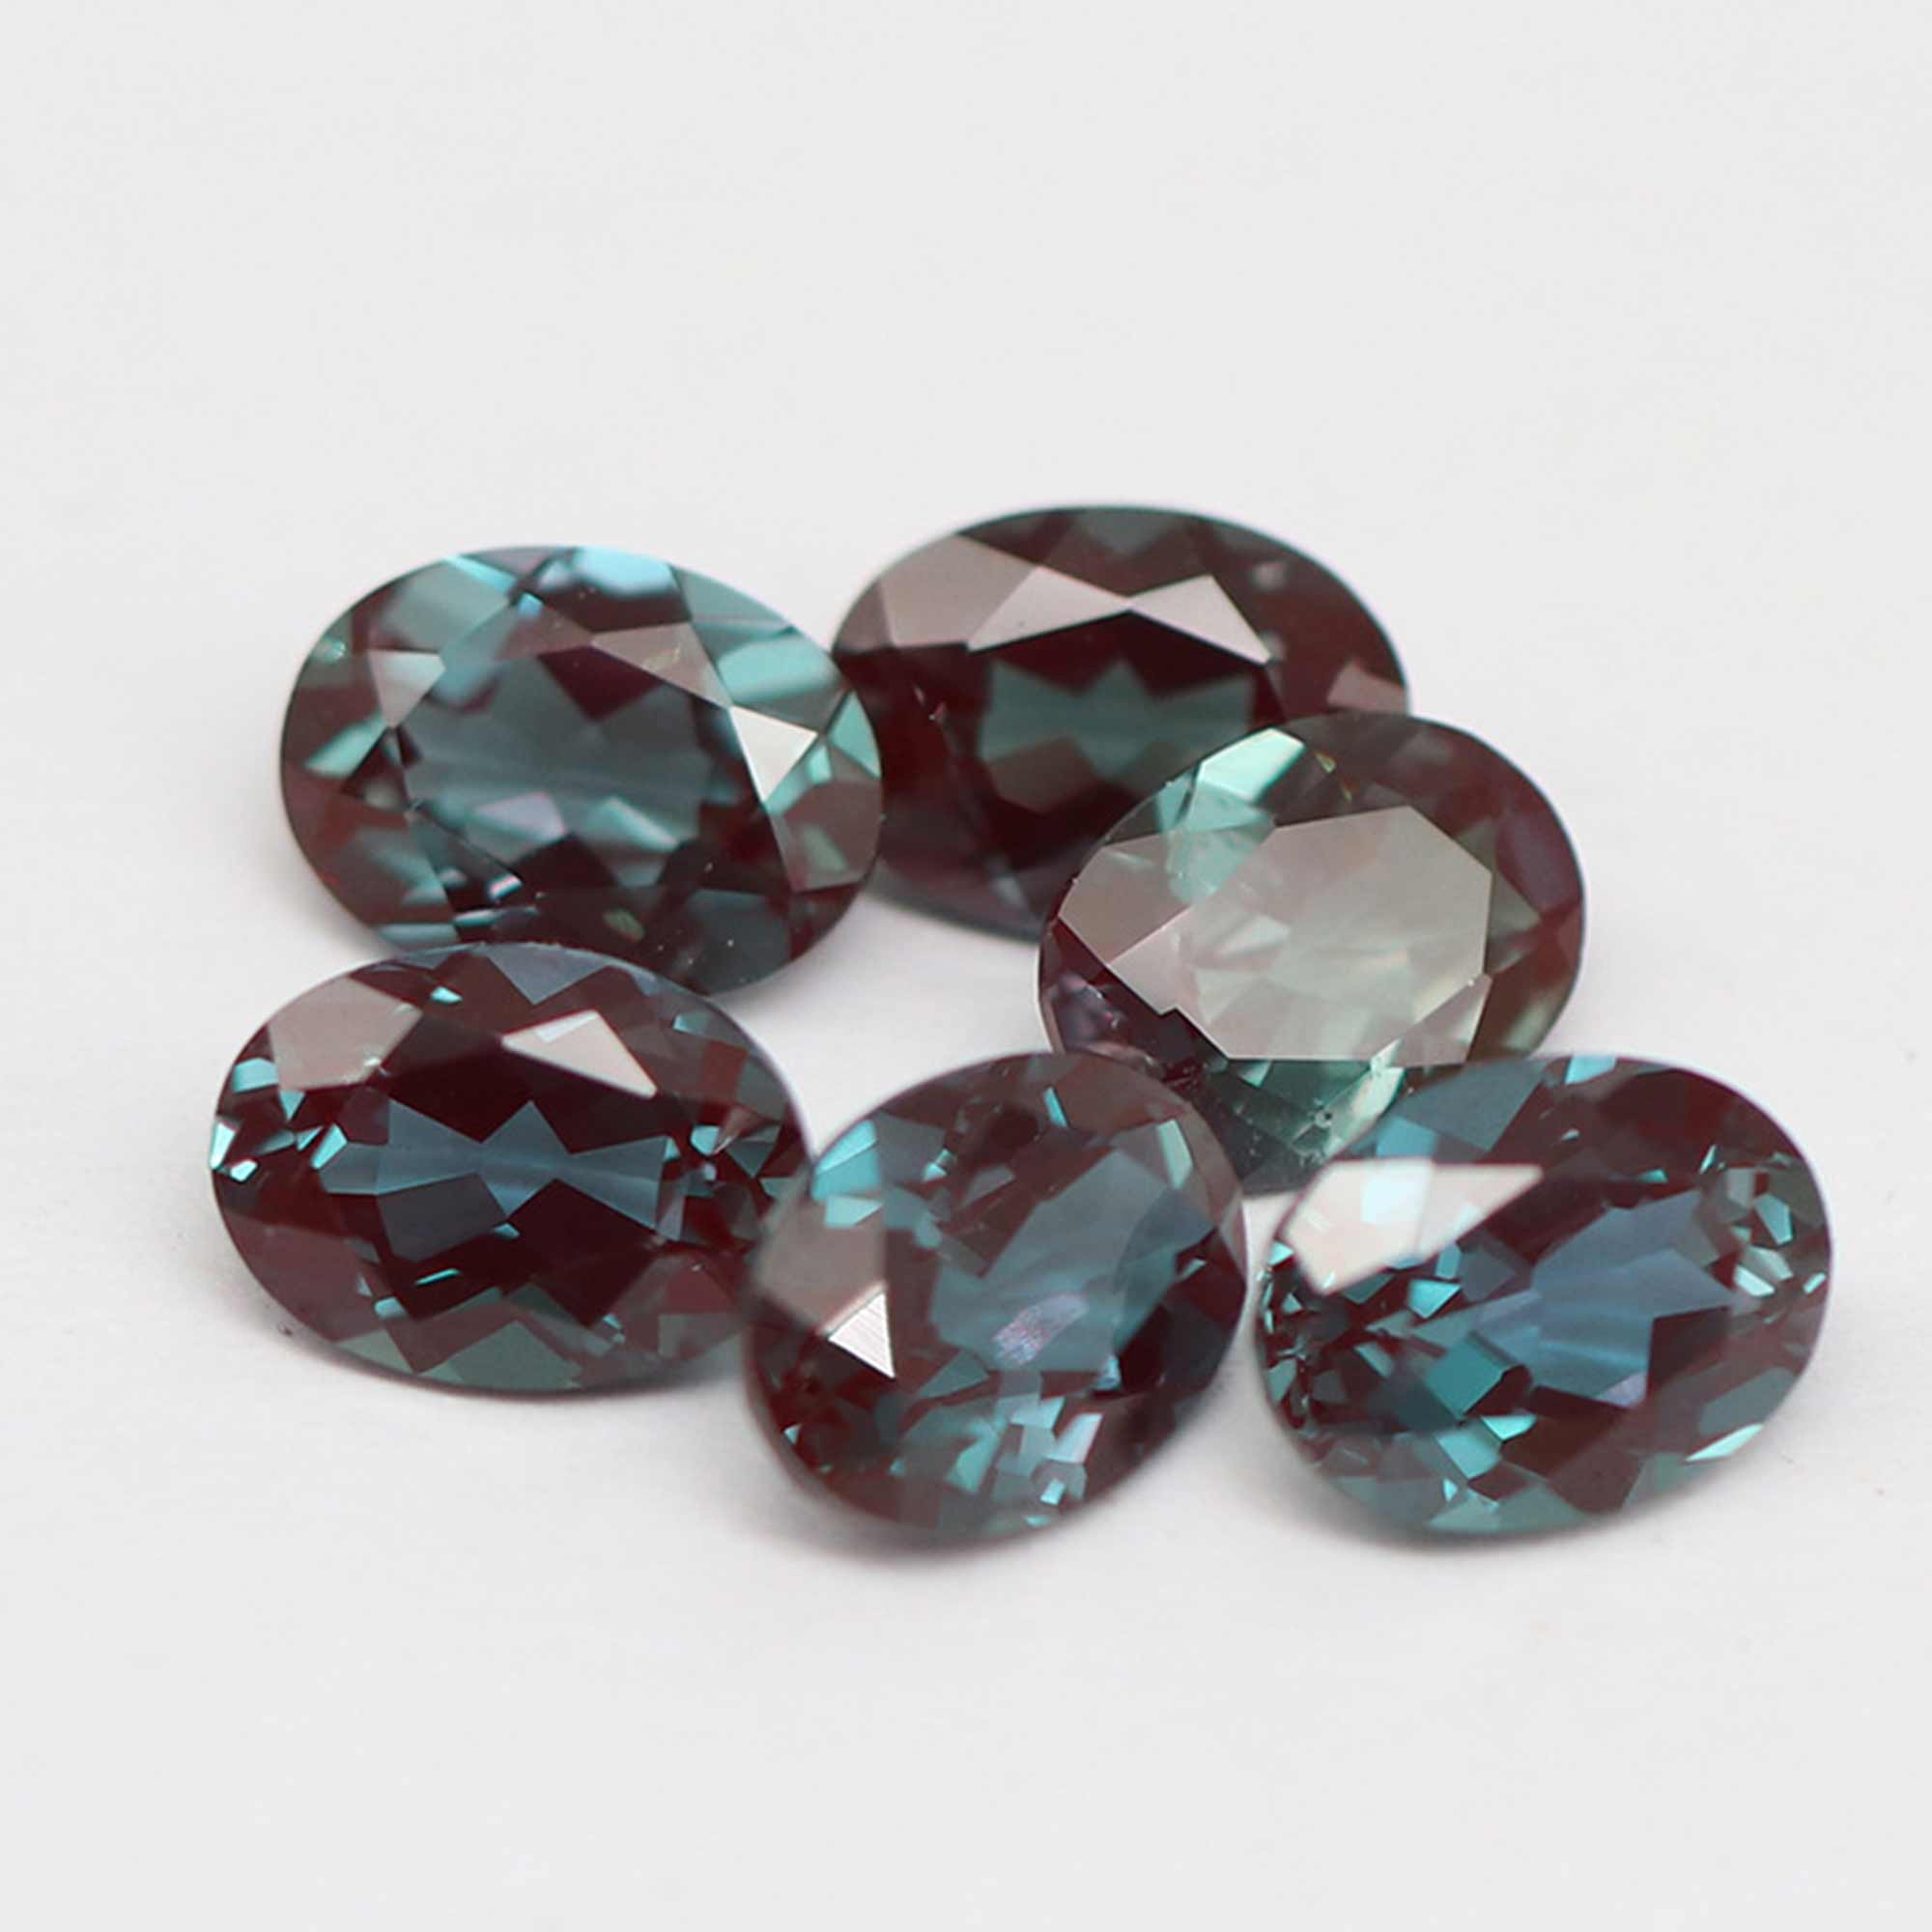 Lab Grown Alexandrite Faceted Gemstone,Oval Color Change Stone,June Birthstone,DIY Loose Gemstone Supplies 4120144 - Click Image to Close